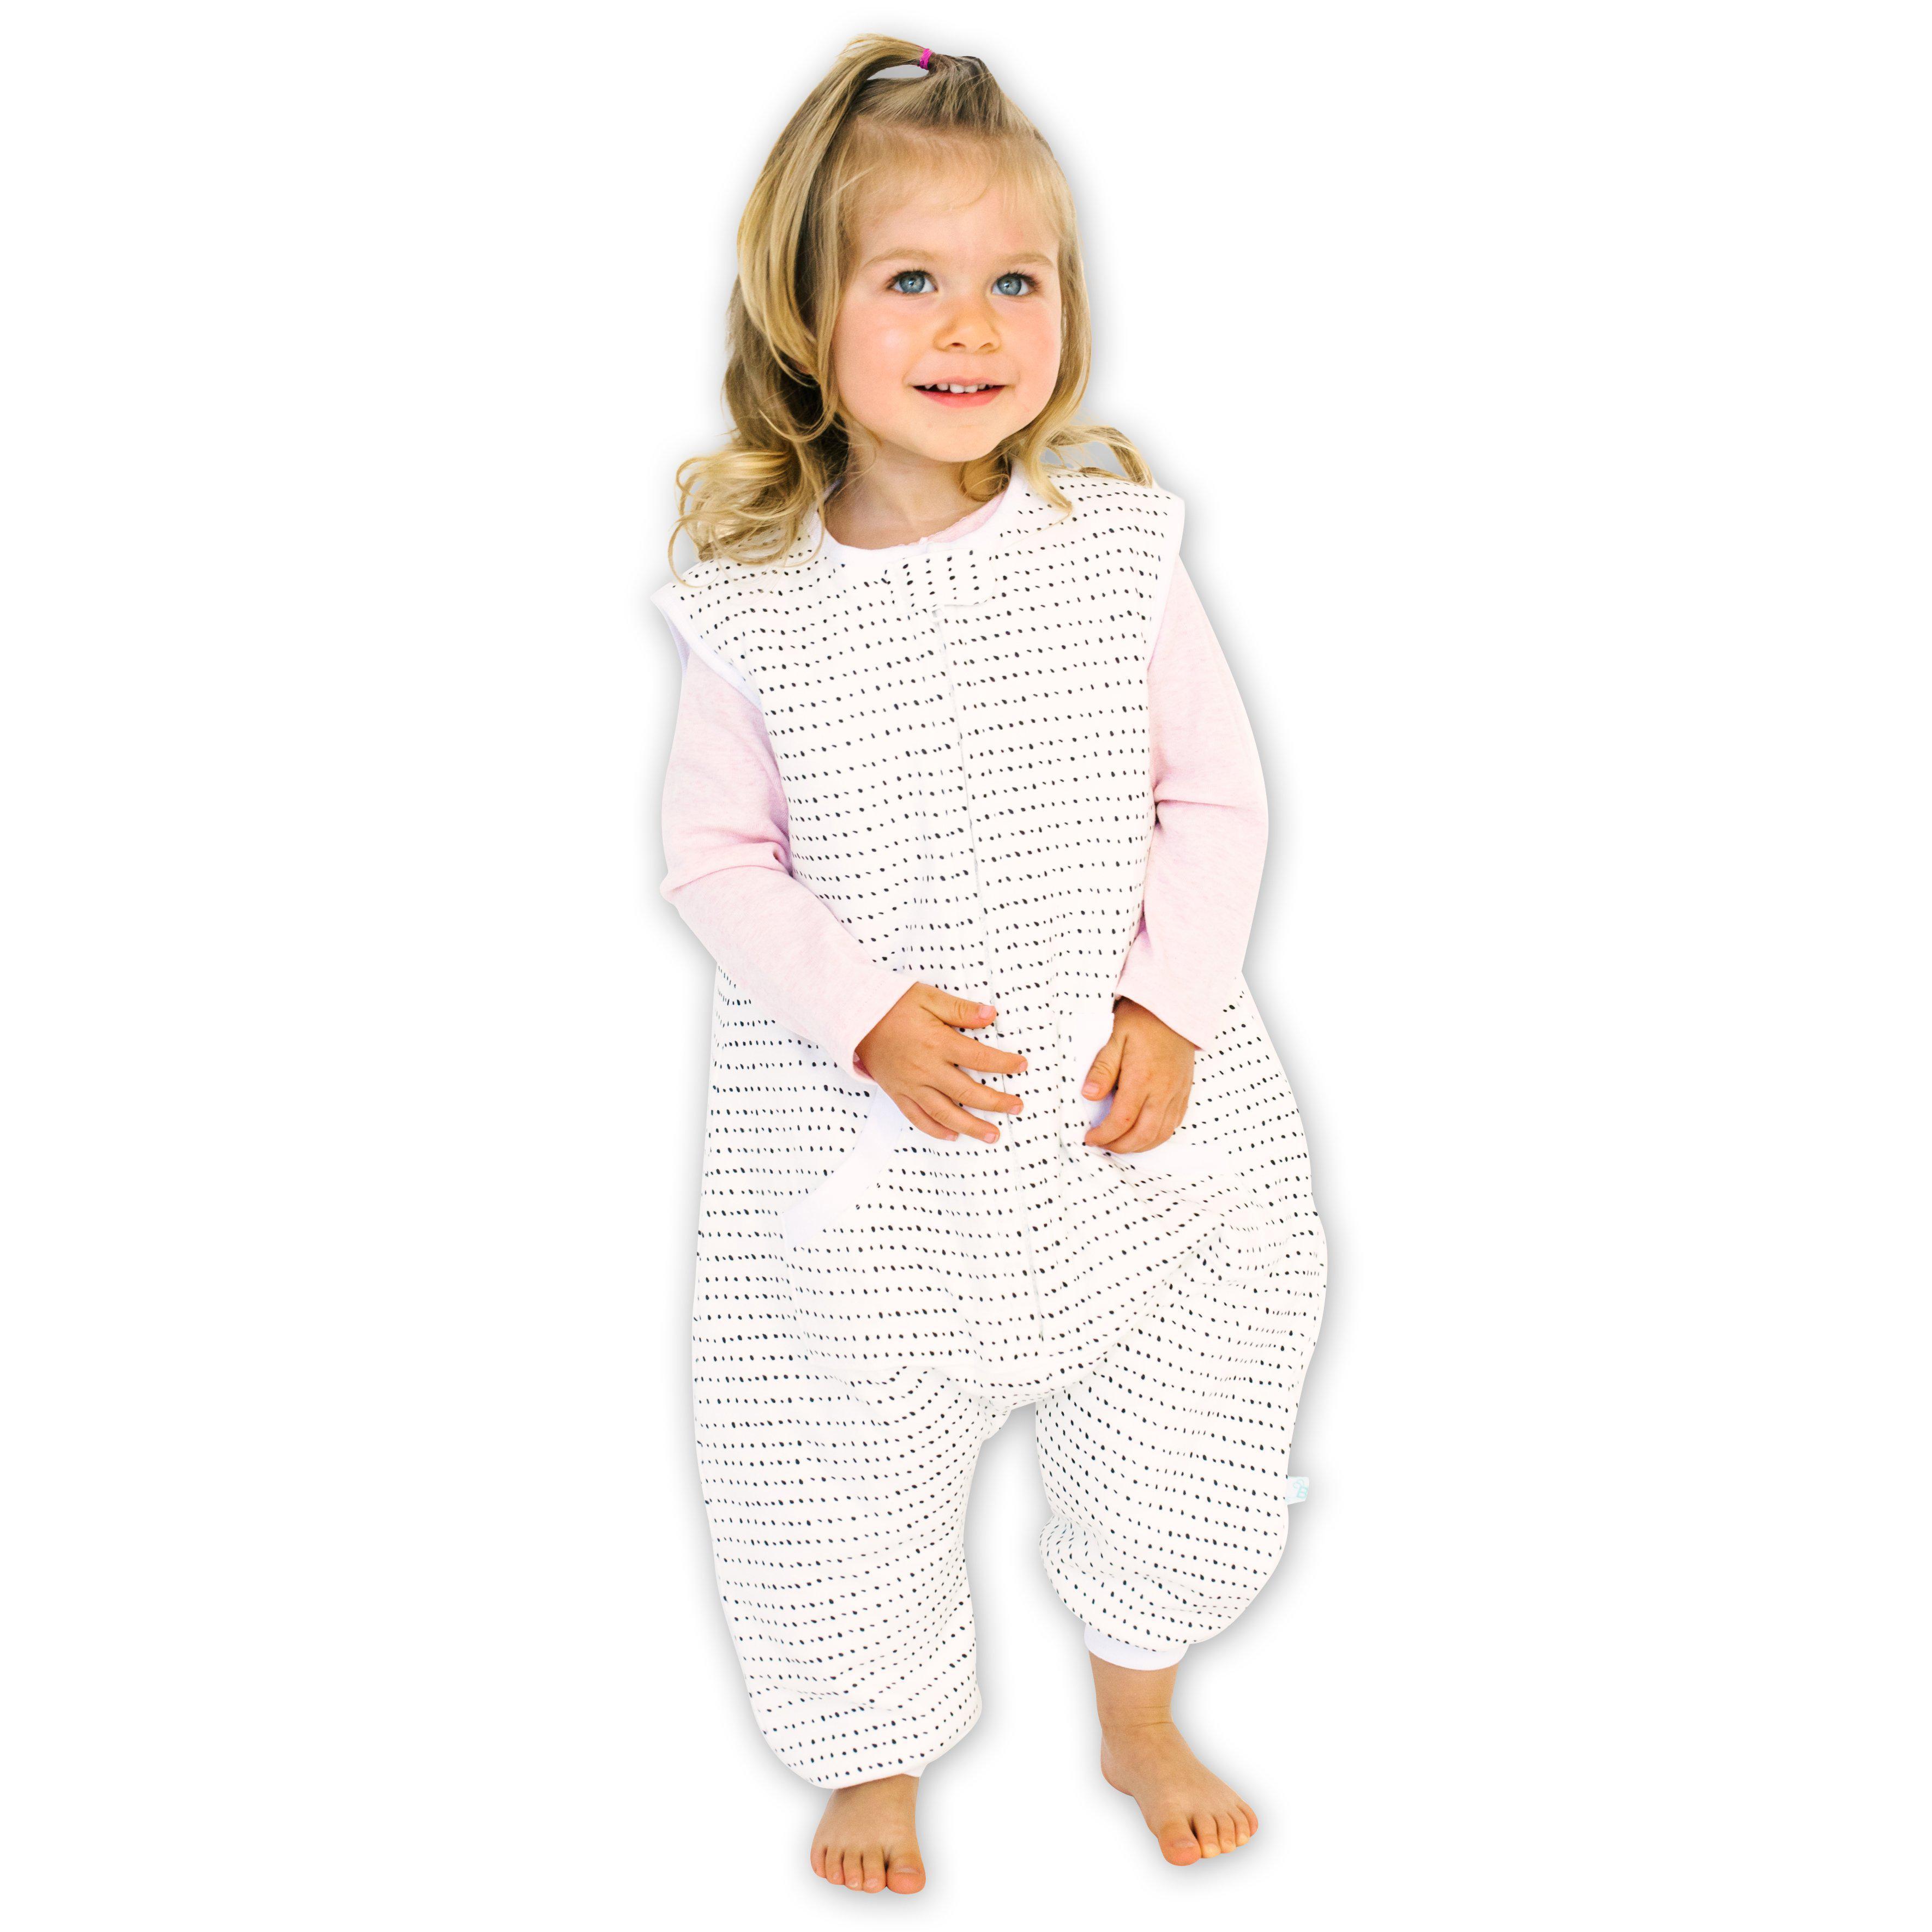 Baby wearing Tealbee Dreamsuit - 1.5 TOG Toddler Wearable Blanket - Available sizes from 12m to 4T